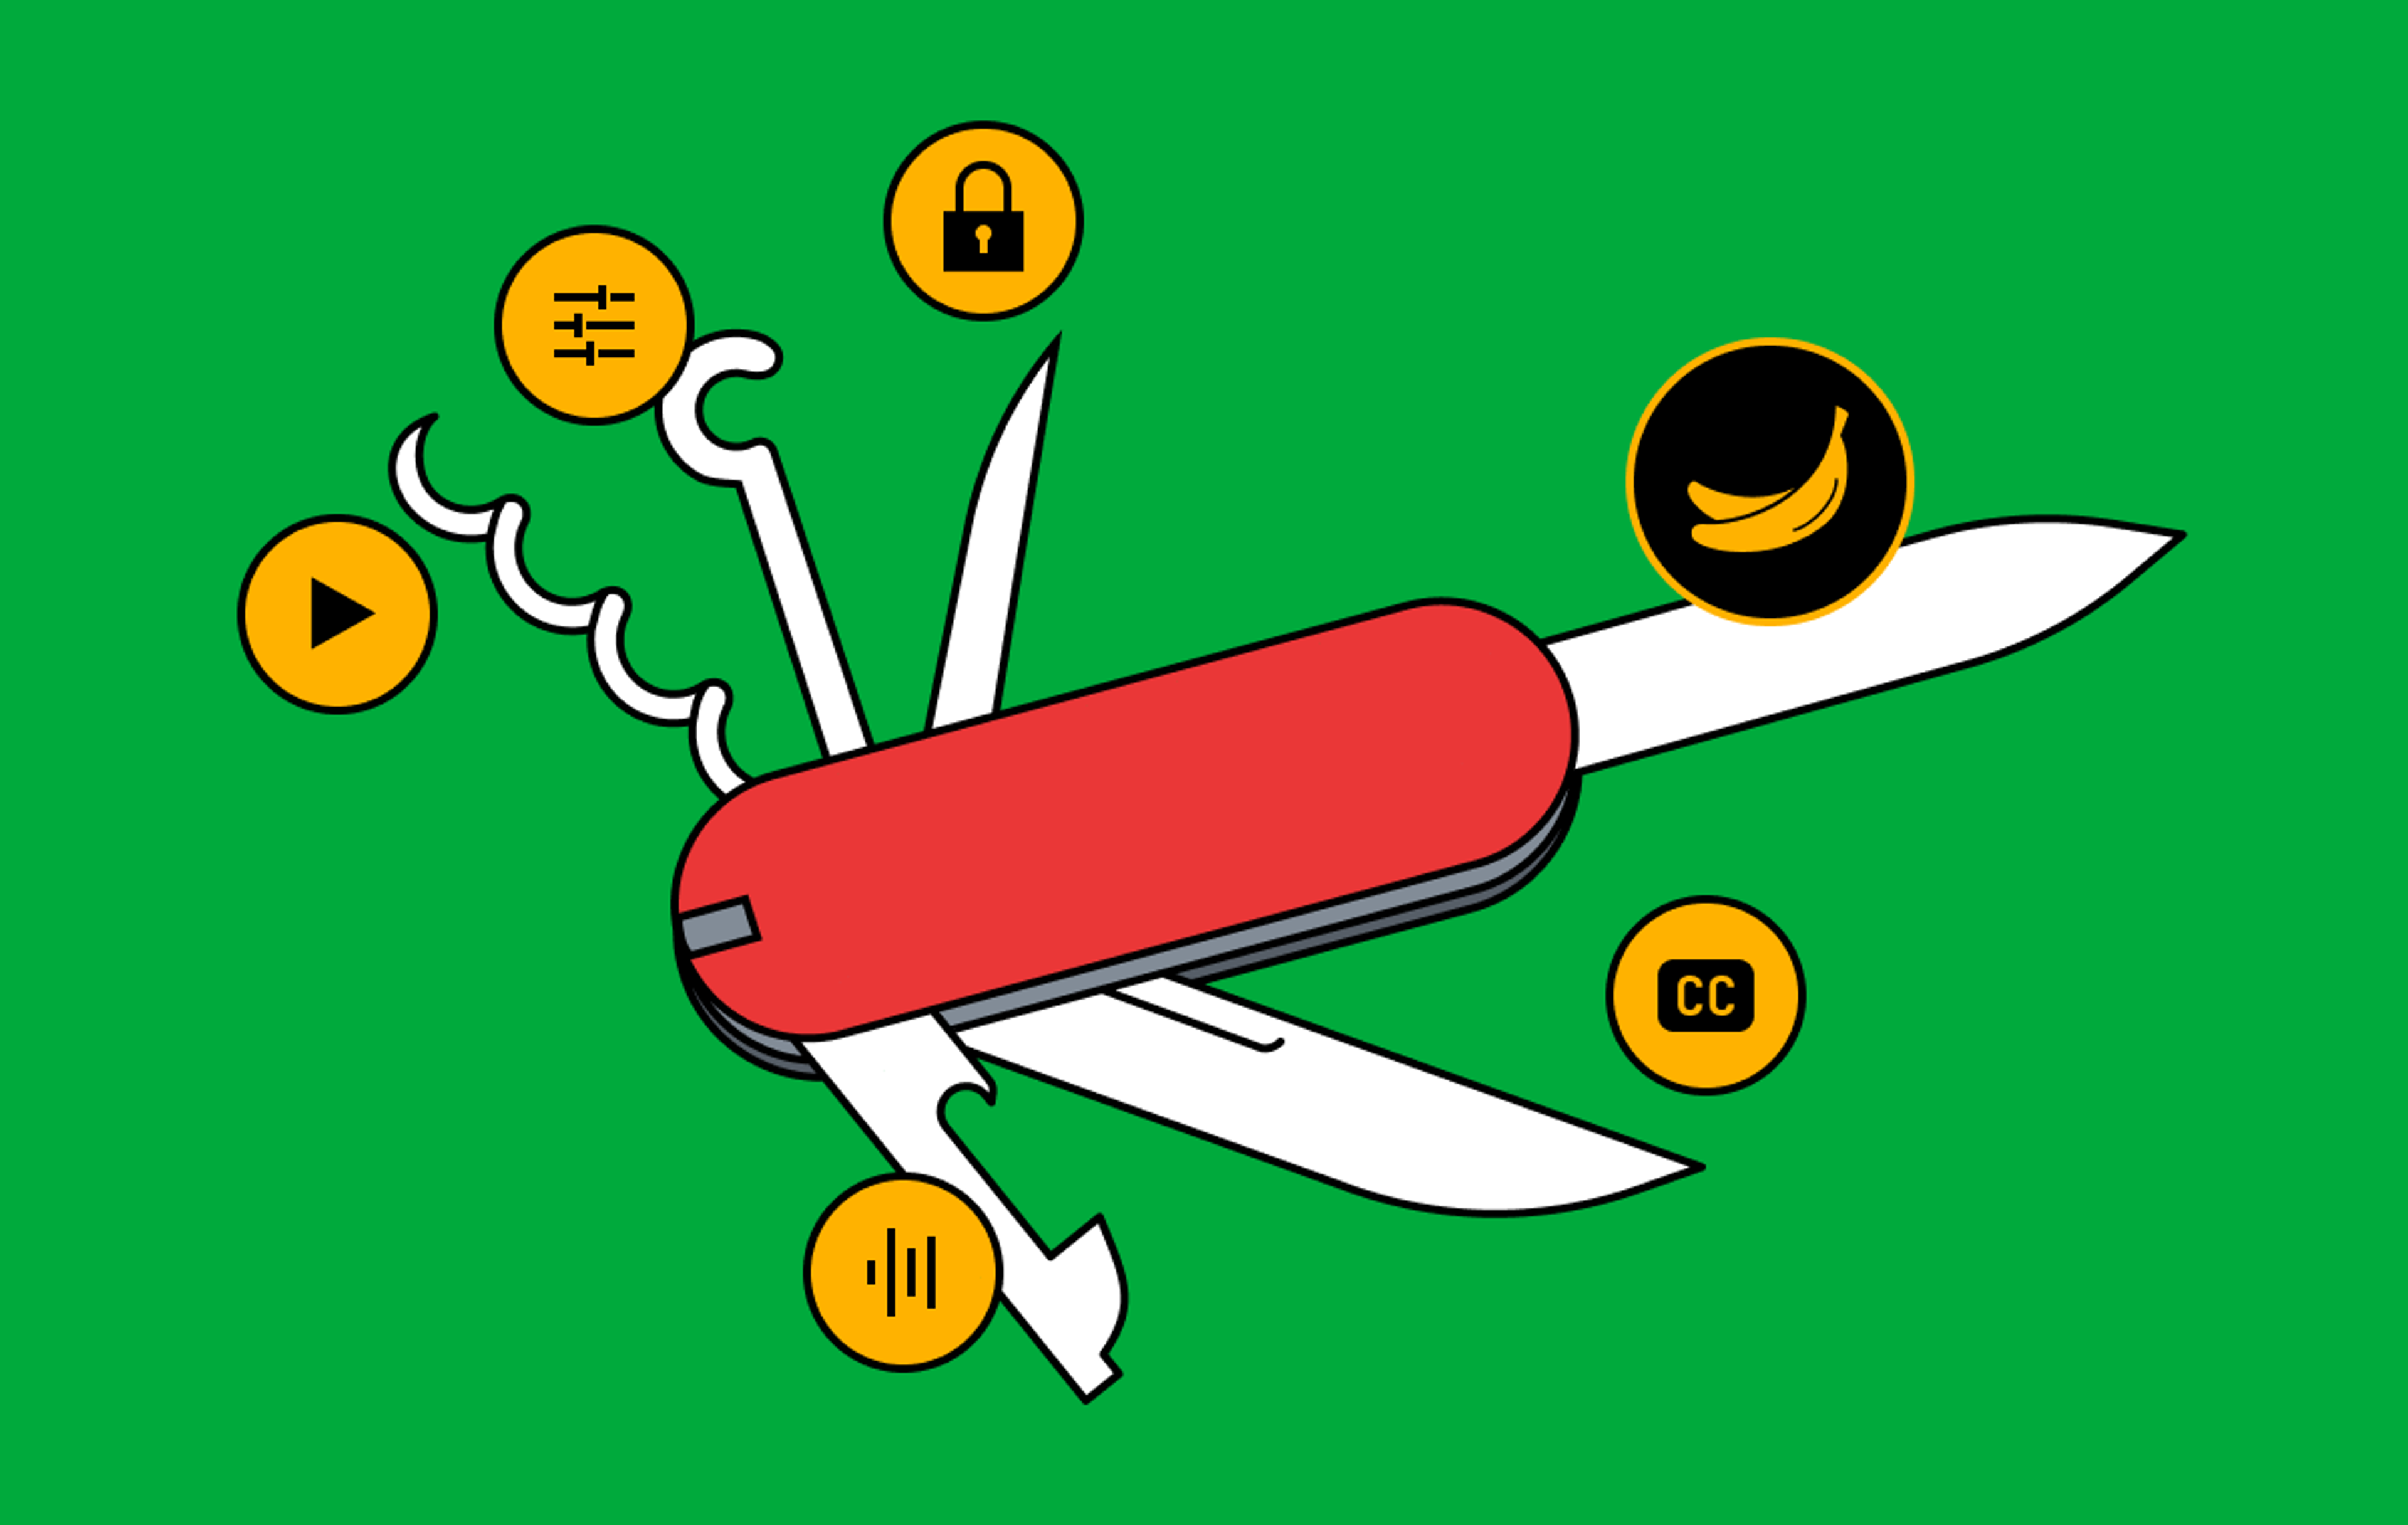 A Swiss Army knife with various video player symbols (and a banana?) floating near each tool